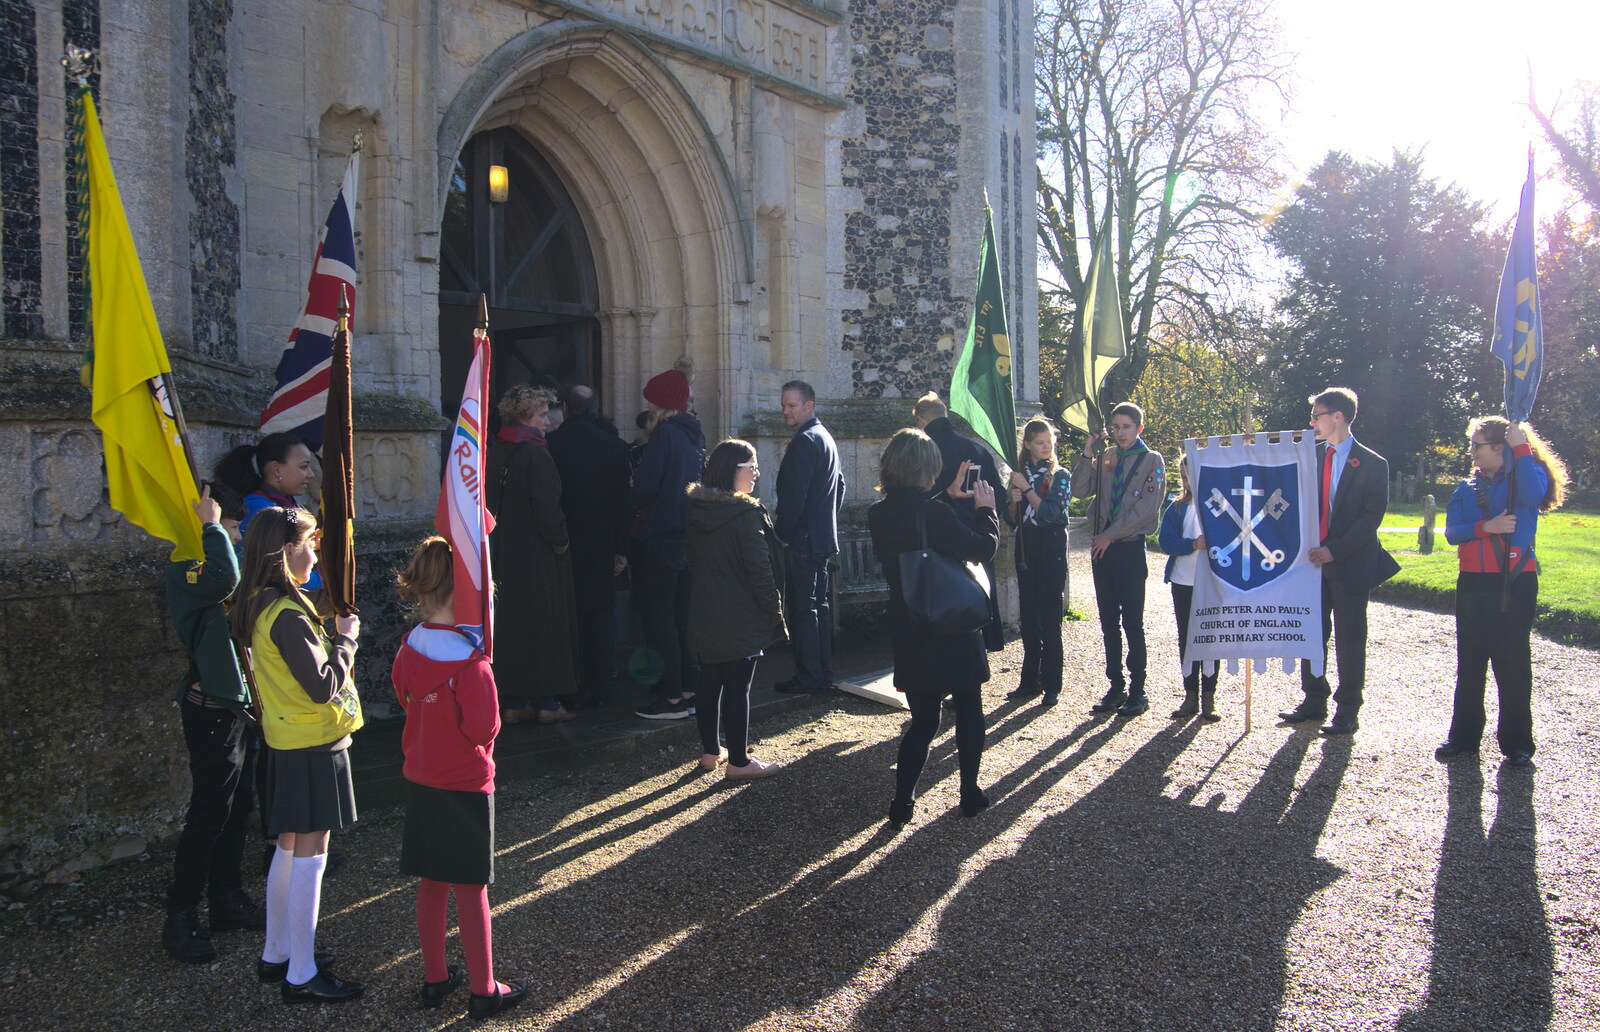 Flag bearers outside the church from The Remembrance Sunday Parade, Eye, Suffolk - 11th November 2018